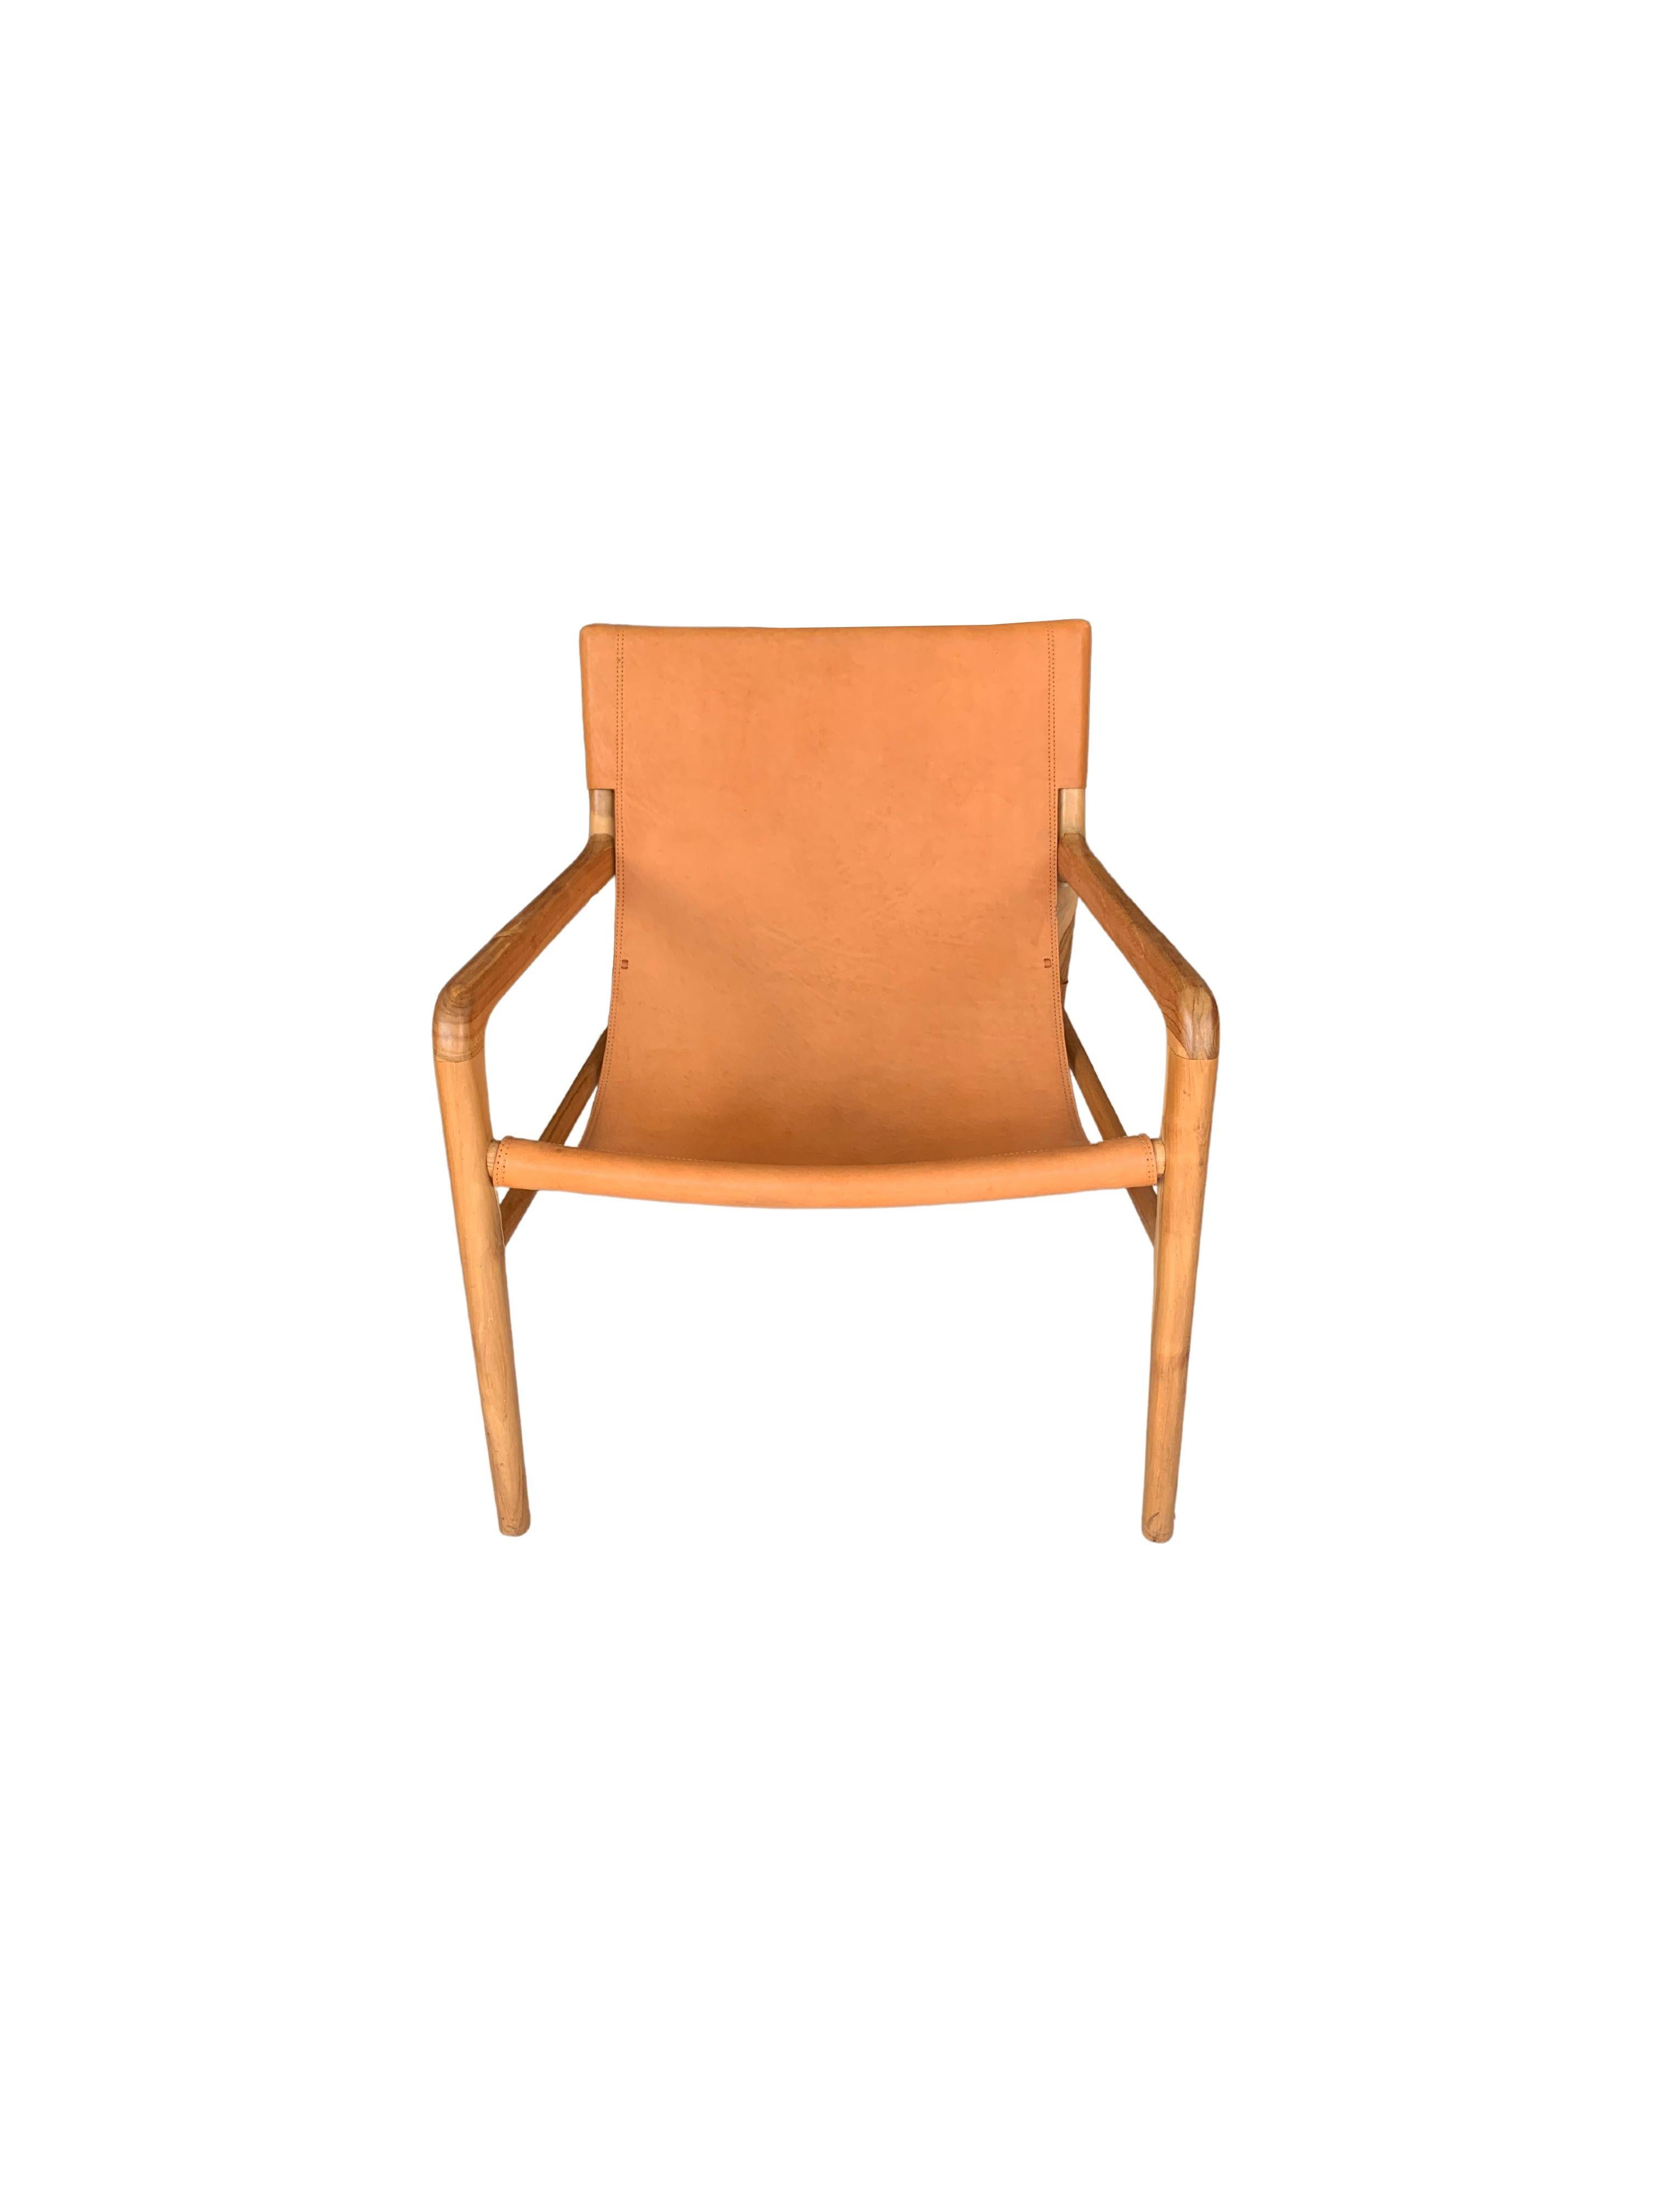 A hand-crafted teak framed & hanging leather seat lounger chair. These chairs are crafted by local artisans using a wood joinery technique without the use of nails. They feature a subtle wood texture and are robust and sturdy.